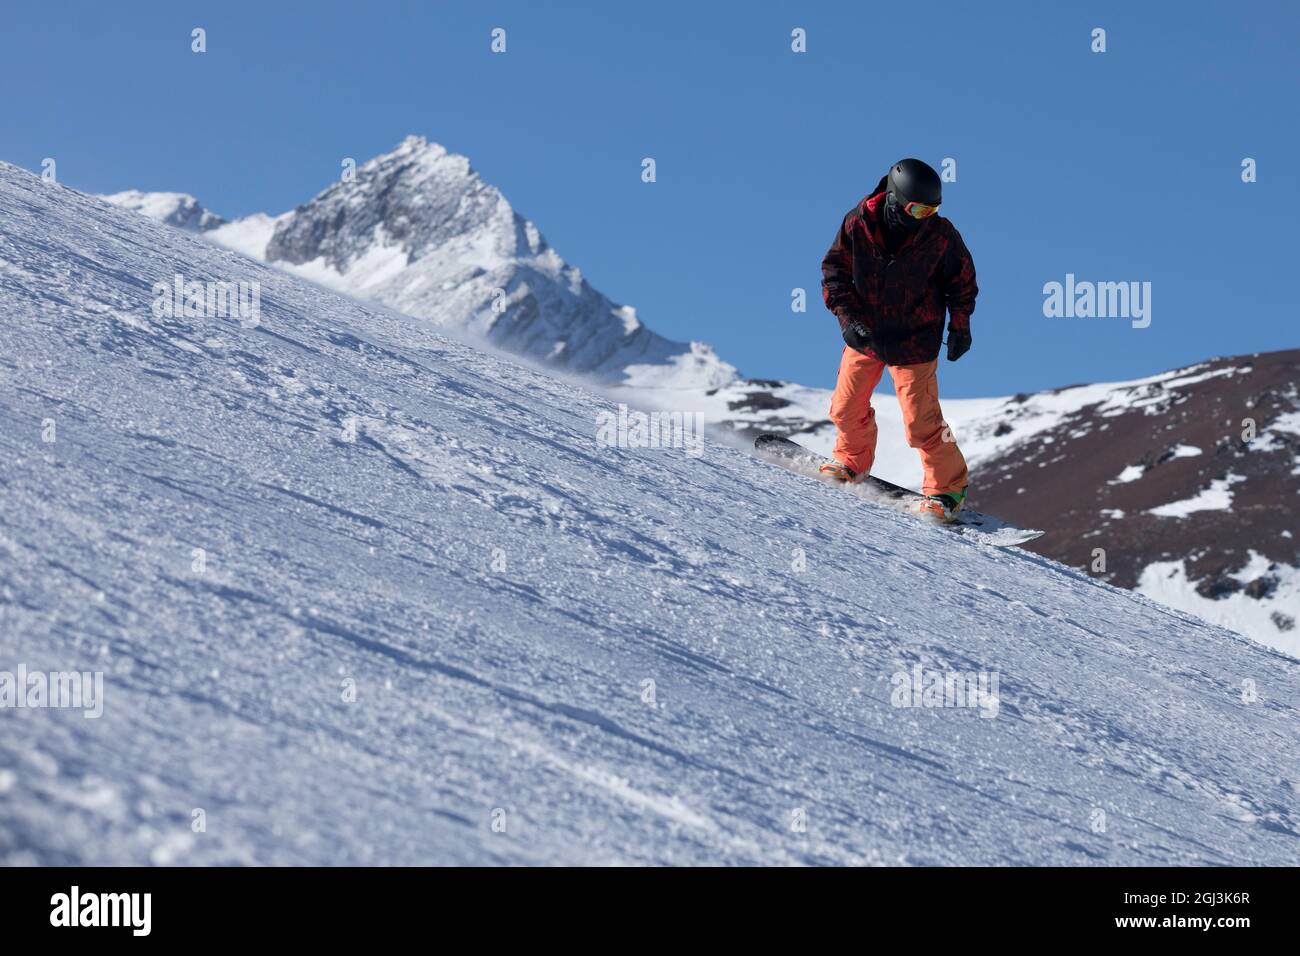 a man riding a snowboard down a snow covered slope on a sunny day with snowy mountains in the background wearing a helmet Stock Photo